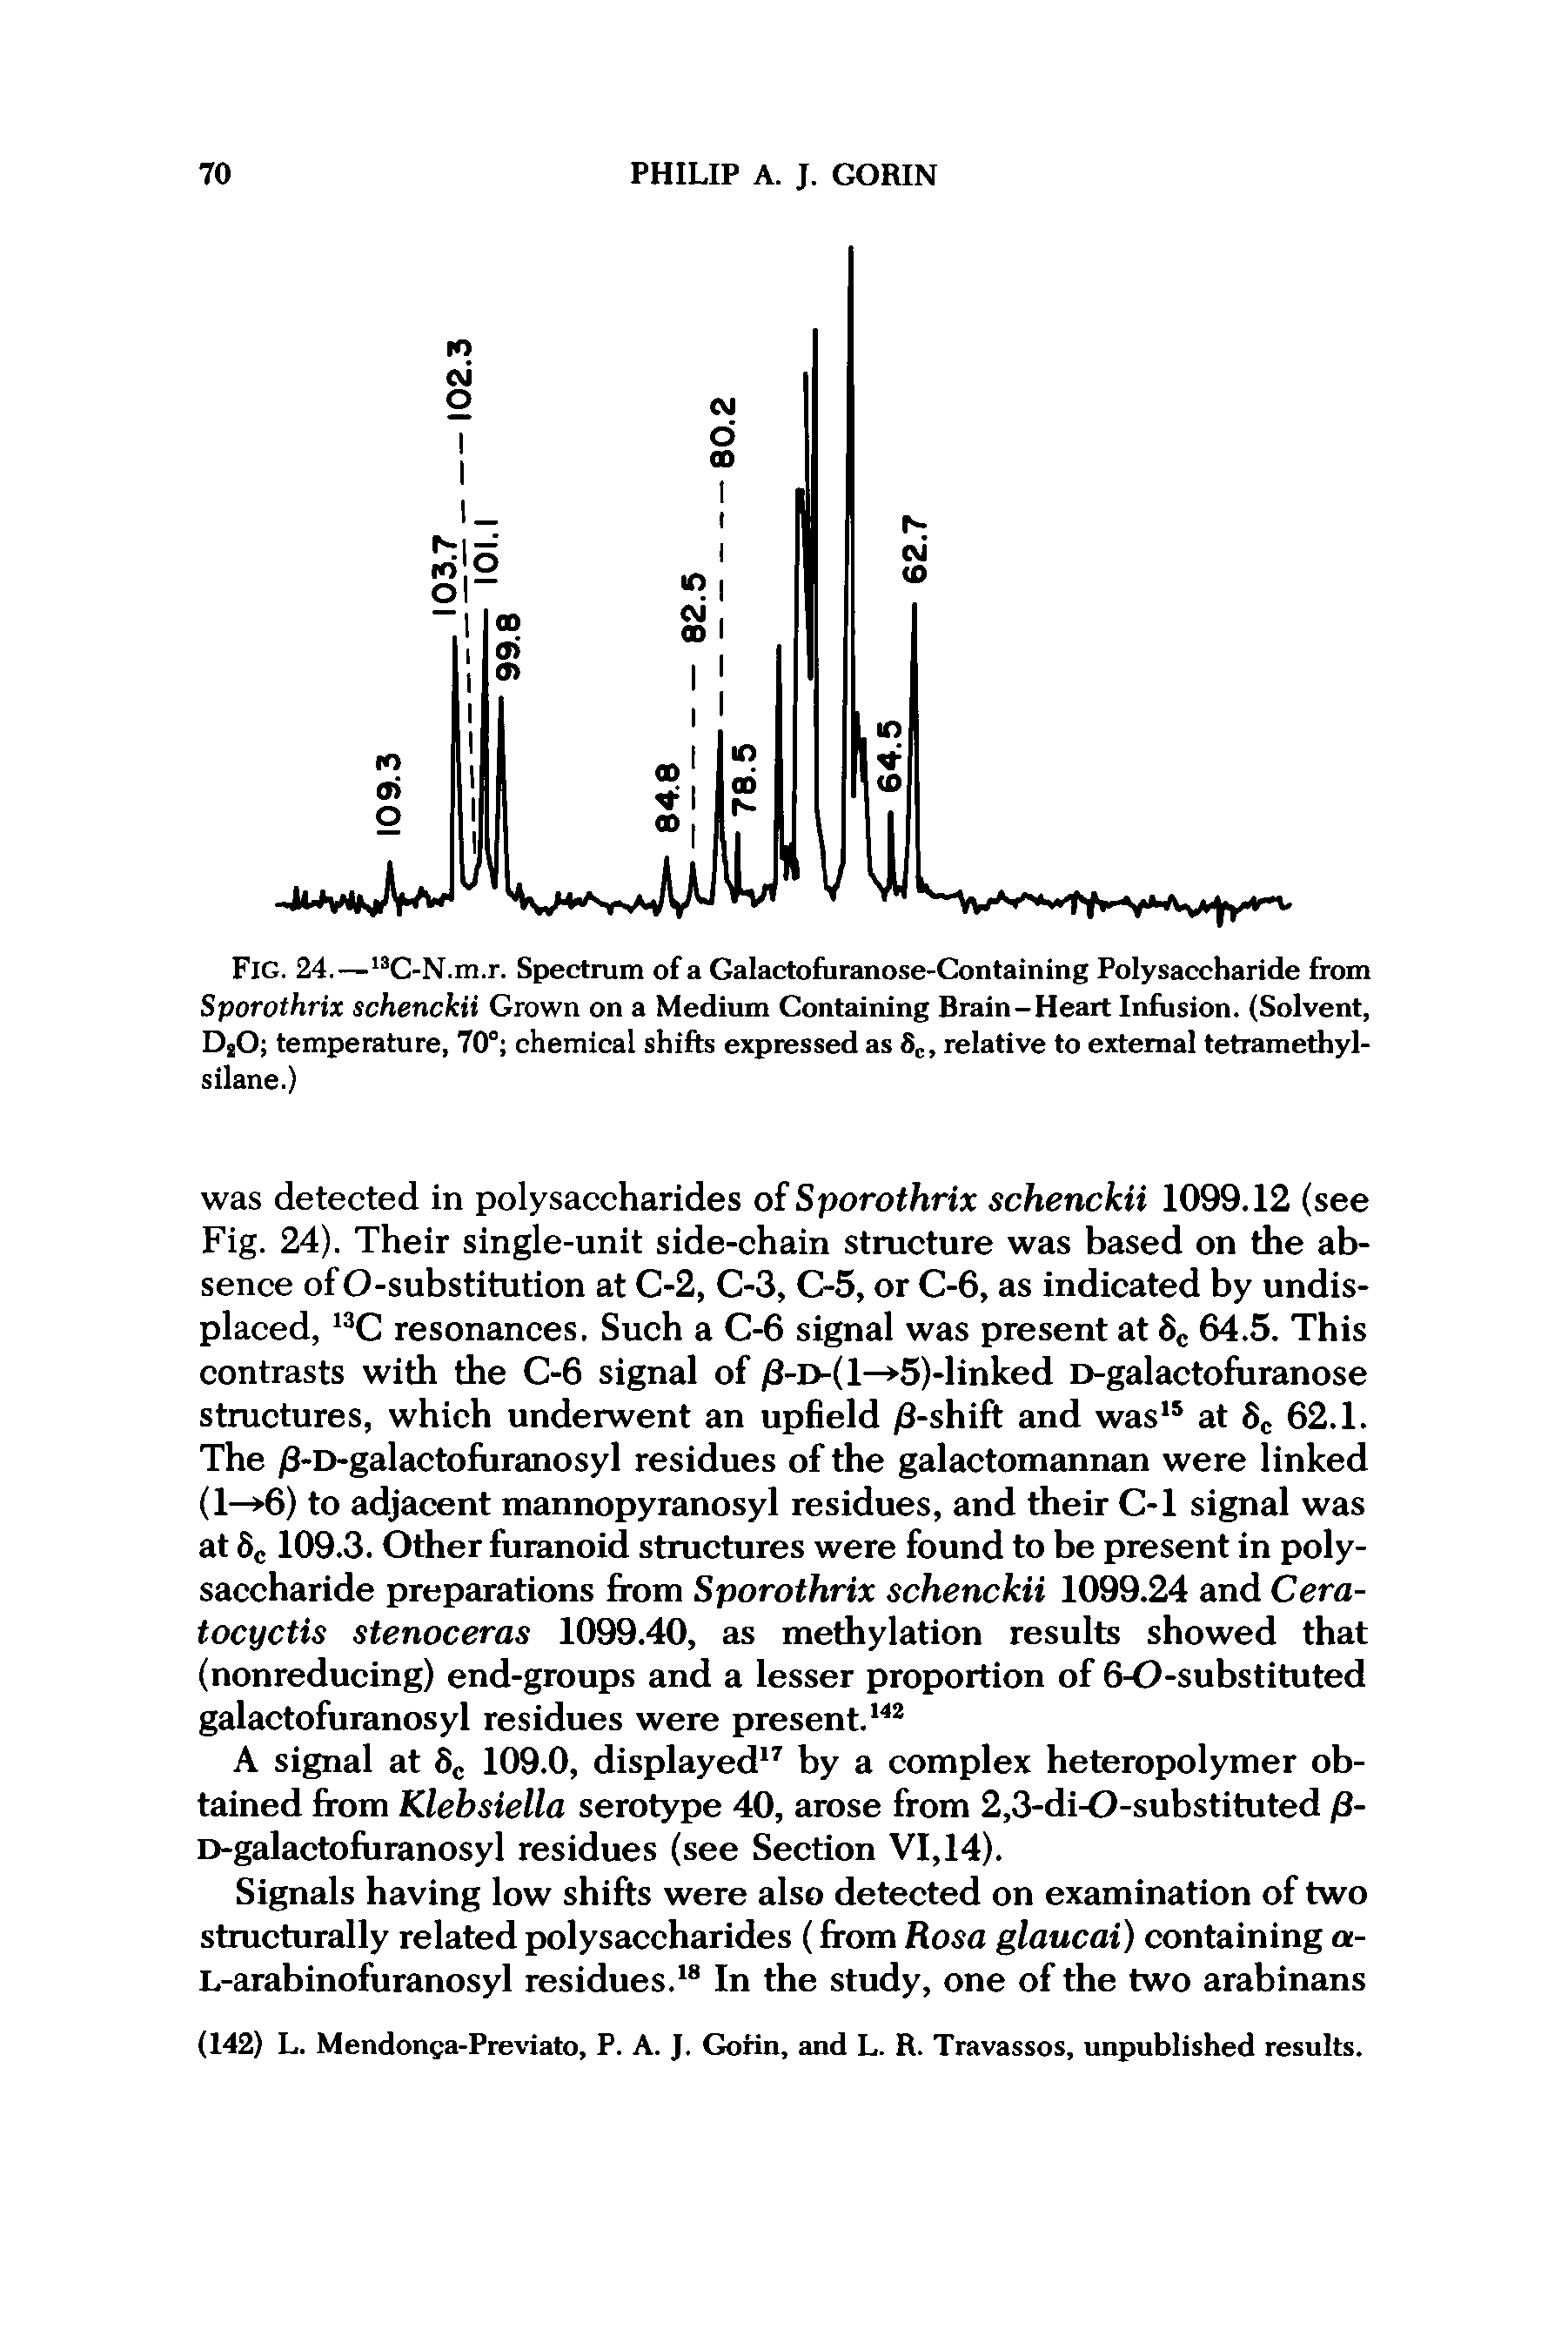 Fig. 24.—13C-N.m.r. Spectrum of a Galactofuranose-Containing Polysaccharide from Sporothrix schenckii Grown on a Medium Containing Brain-Heart Infusion. (Solvent, DsO temperature, 70° chemical shifts expressed as 8C, relative to external tetramethyl-silane.)...